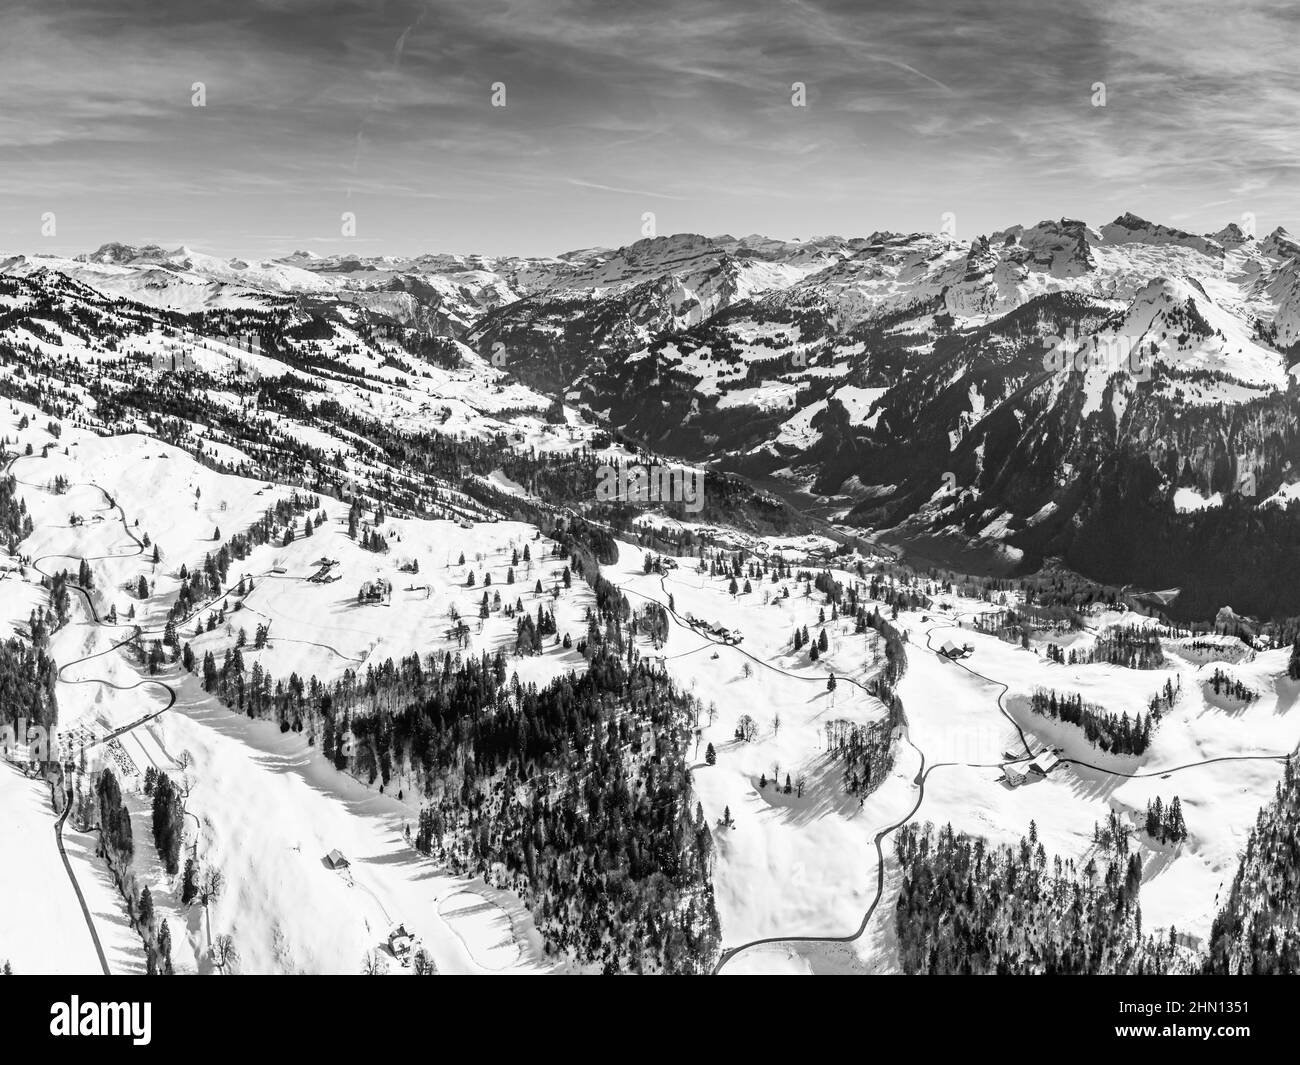 Drone swiss alps Black and White Stock Photos & Images - Alamy